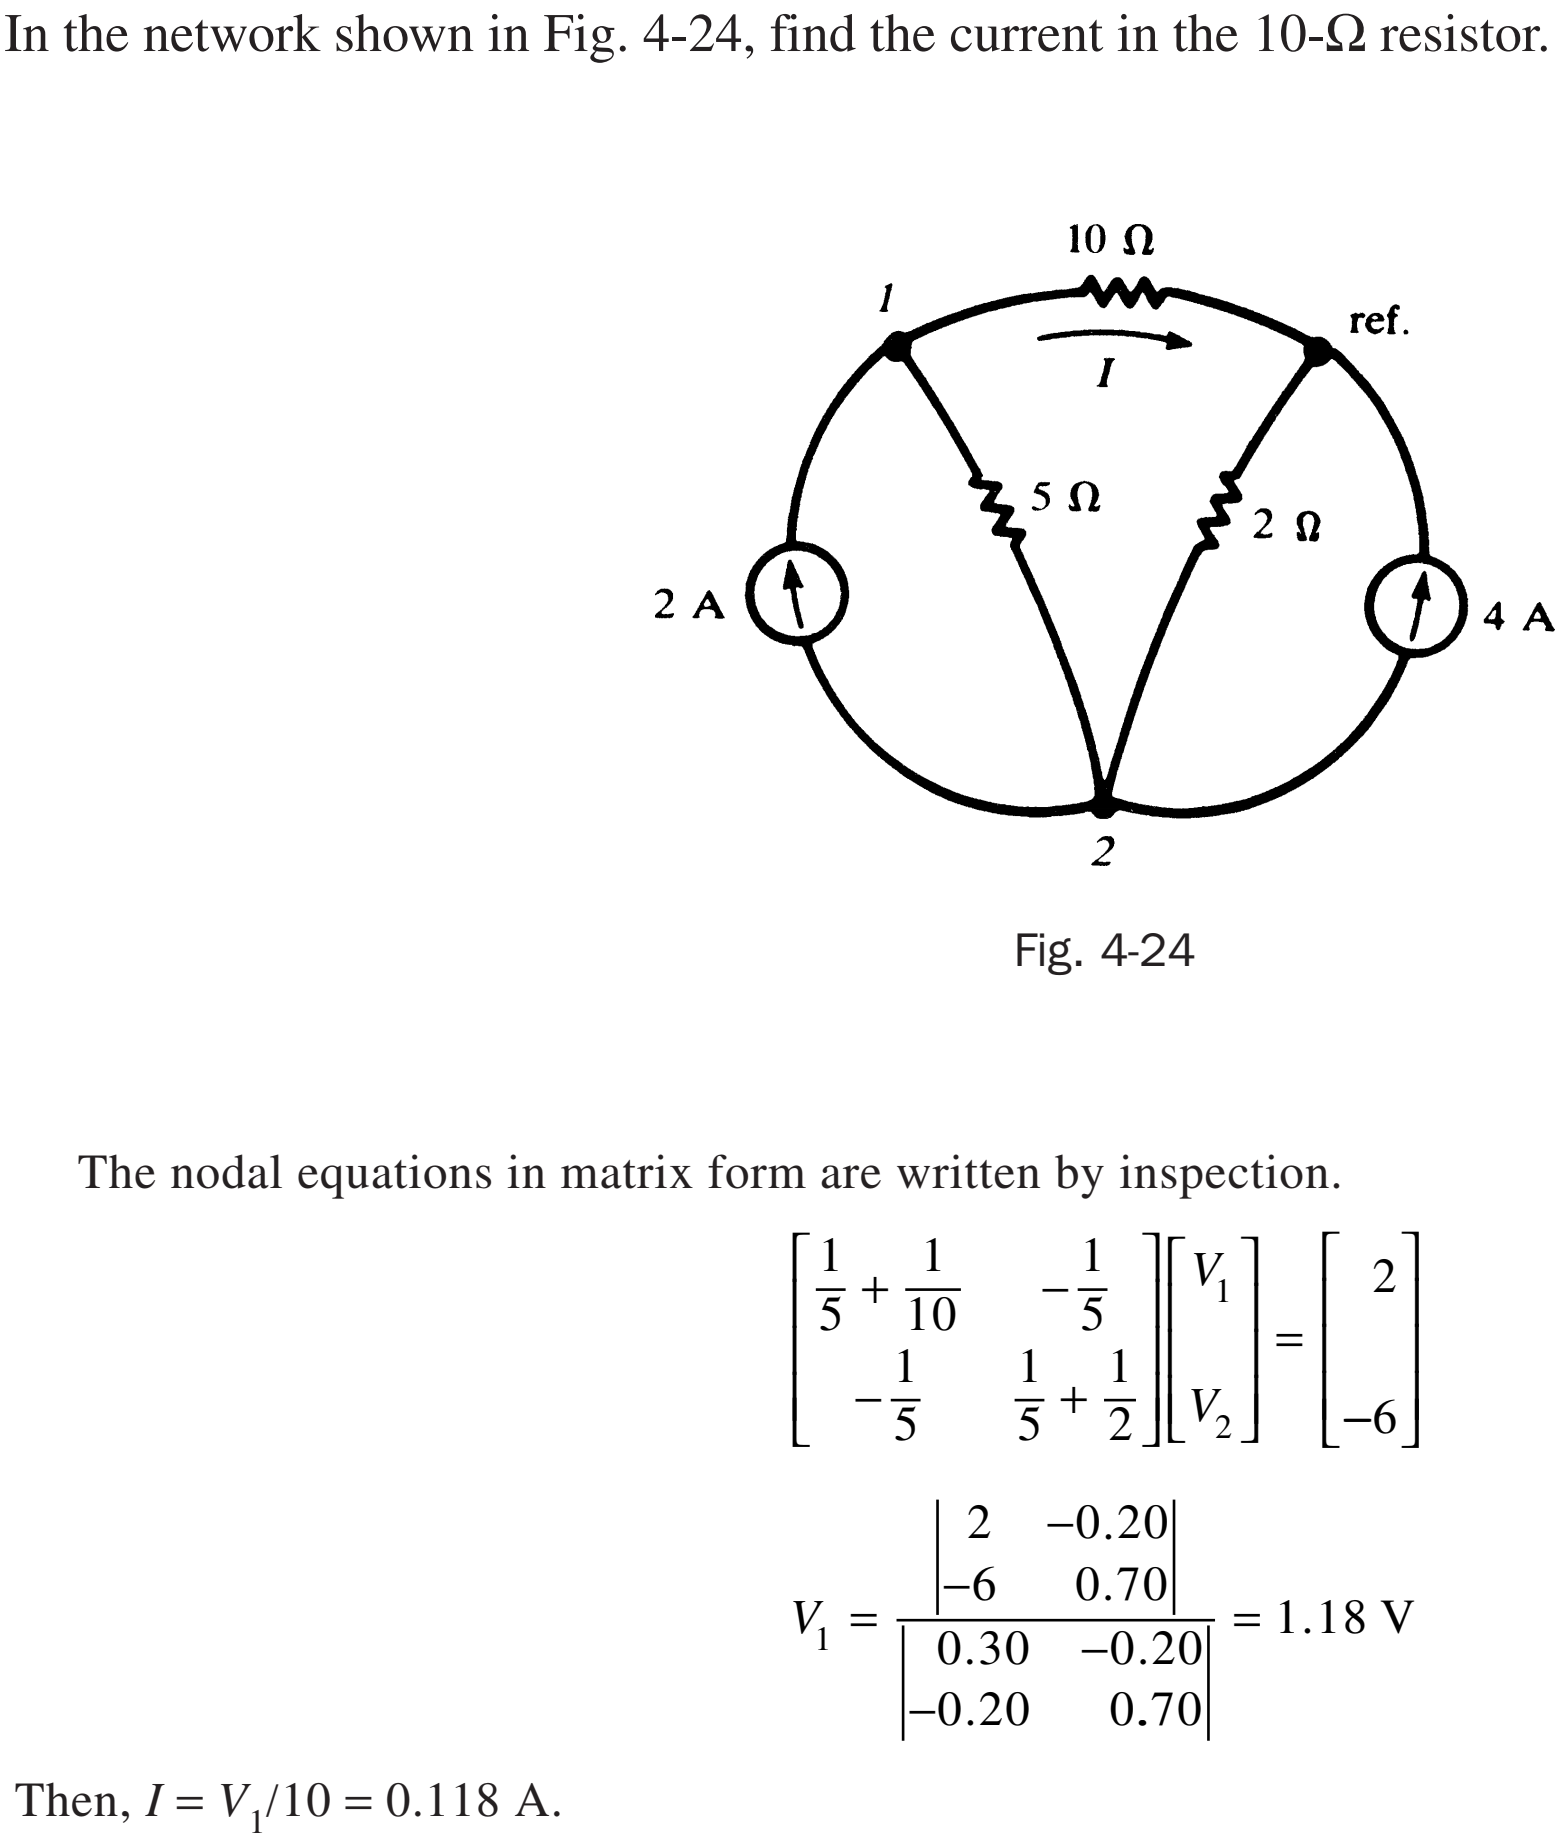 In the network shown in Fig. 4-24, find the current in the 10-2 resistor
10
1
ref
5 Ω
2 0
2 A
4 A
2
Fig. 4-24
The nodal equations in matrix form are written by inspection.
1
1
1
2
10
5
1
1
Va
-6
5
-0.20
0.70
0.30 -0.20
2
-6
= 1.18 V
-0.20
0.70
Then, I V,/10 0.118 A
